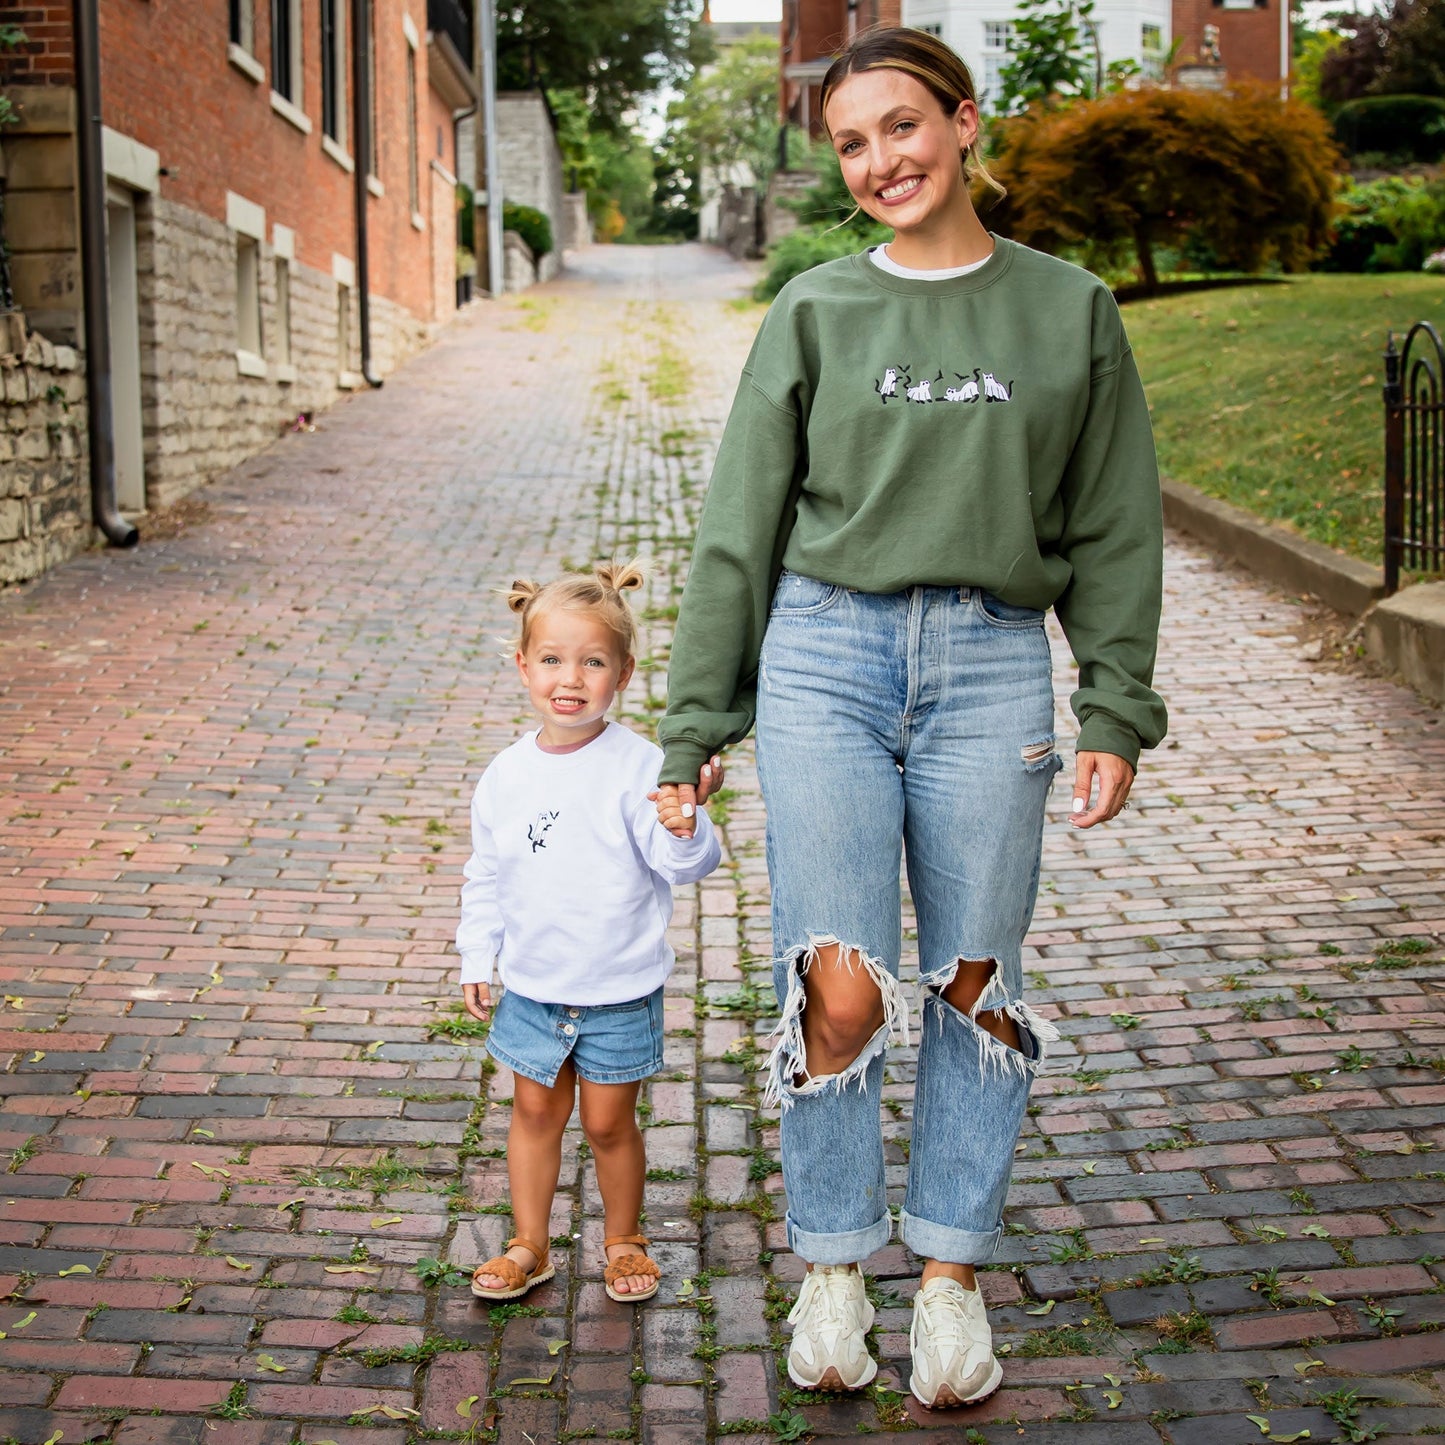 young woman wearing a military green crewneck sweatshirt with embroidered ghost cats design across the chest with her young daughter in a white crewneck sweatshirt with embroidered ghost cat